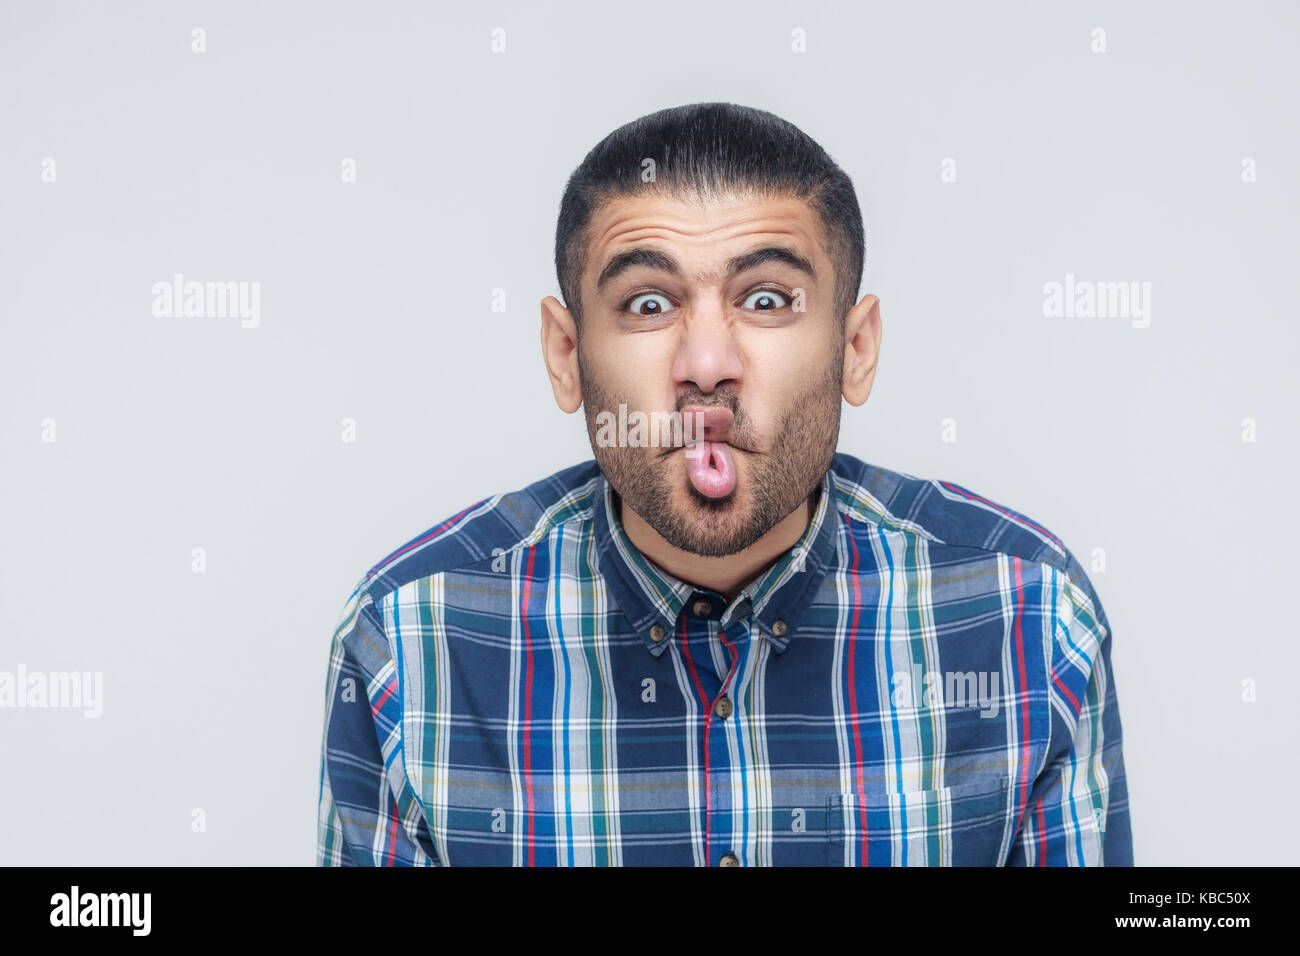 comic faces concept. Funny hipster showing stupid face and looking at camera. Studio shot Stock Photo